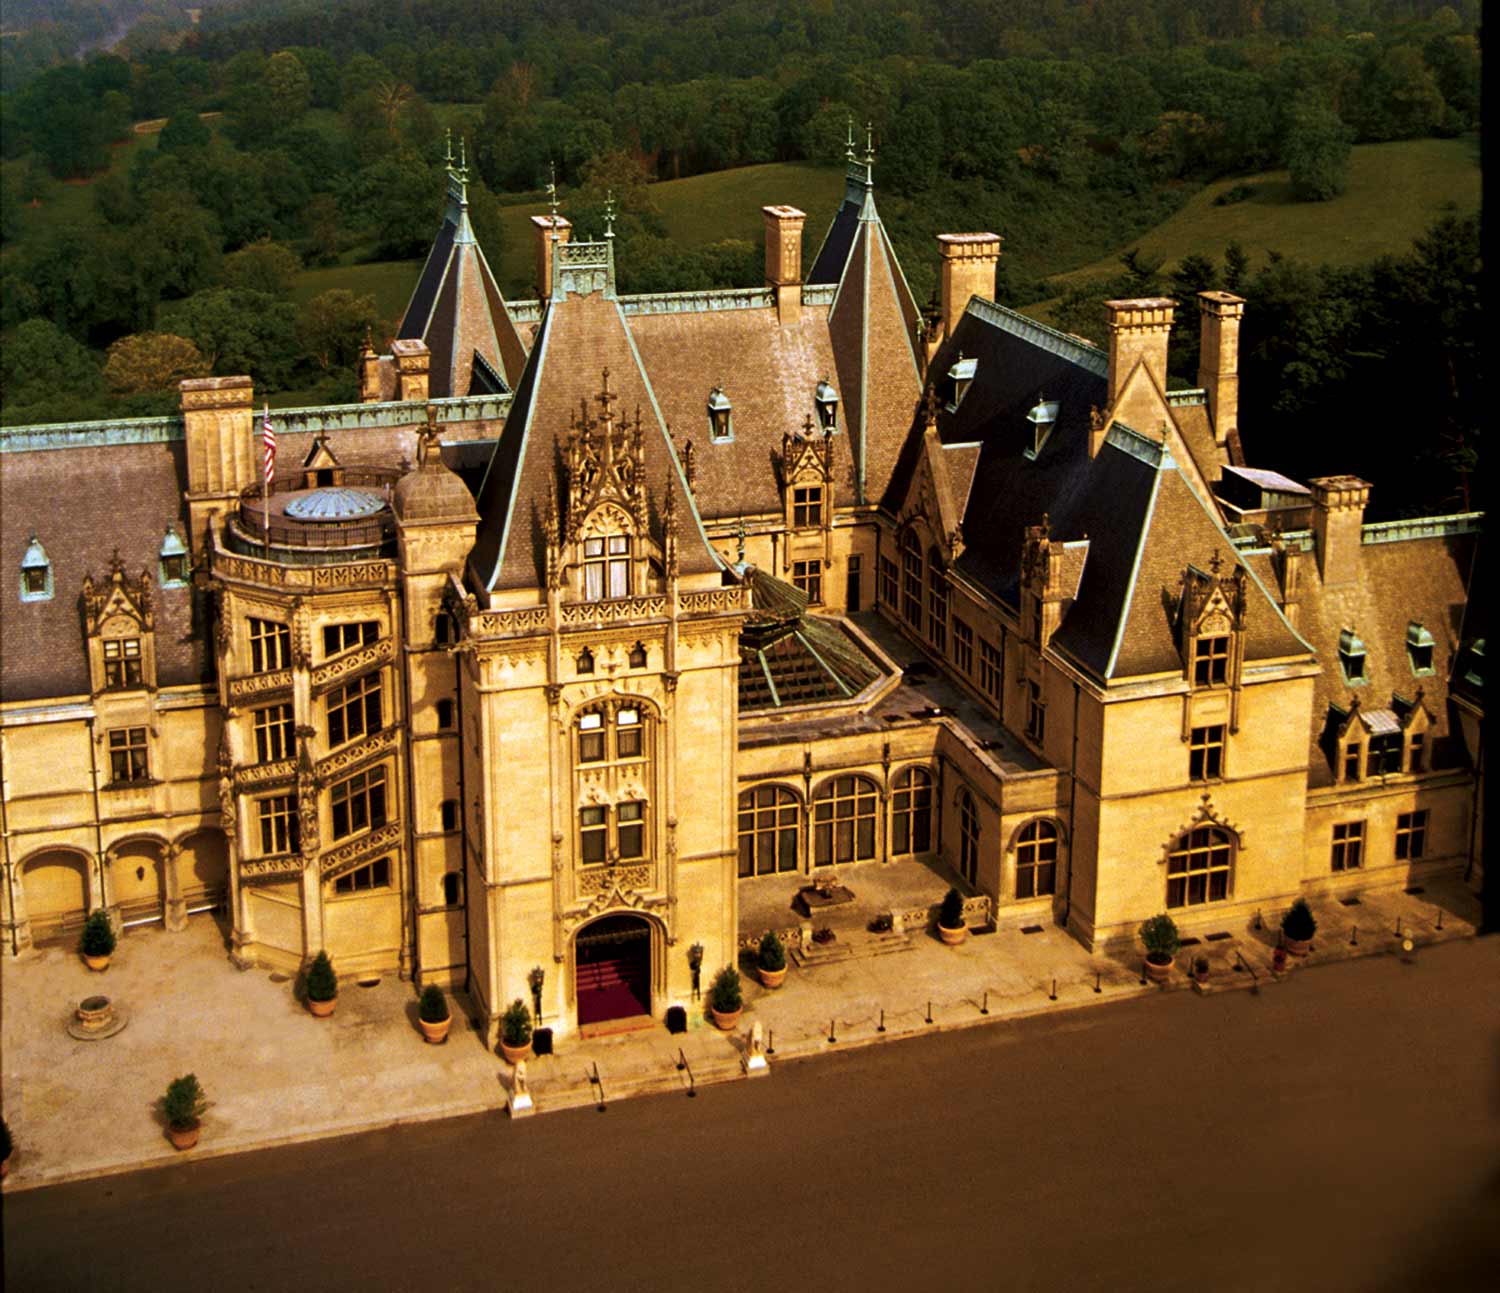 An aerial view of the extensive and extravagant Biltmore Mansion